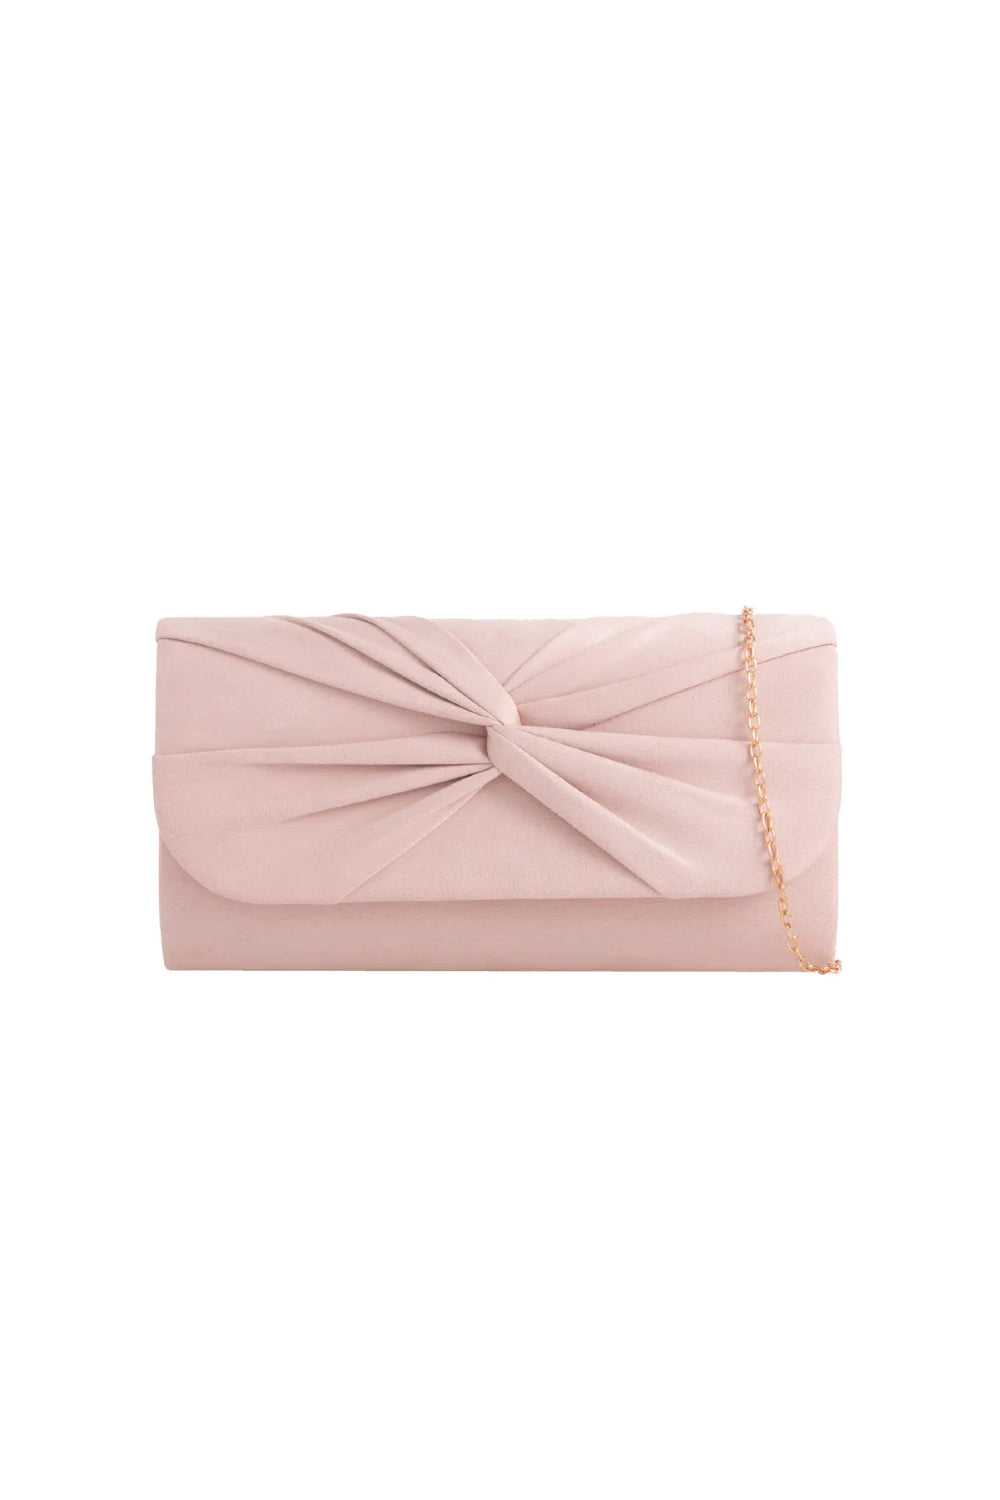 Nude Suede Clutch Bag with Knot Detail